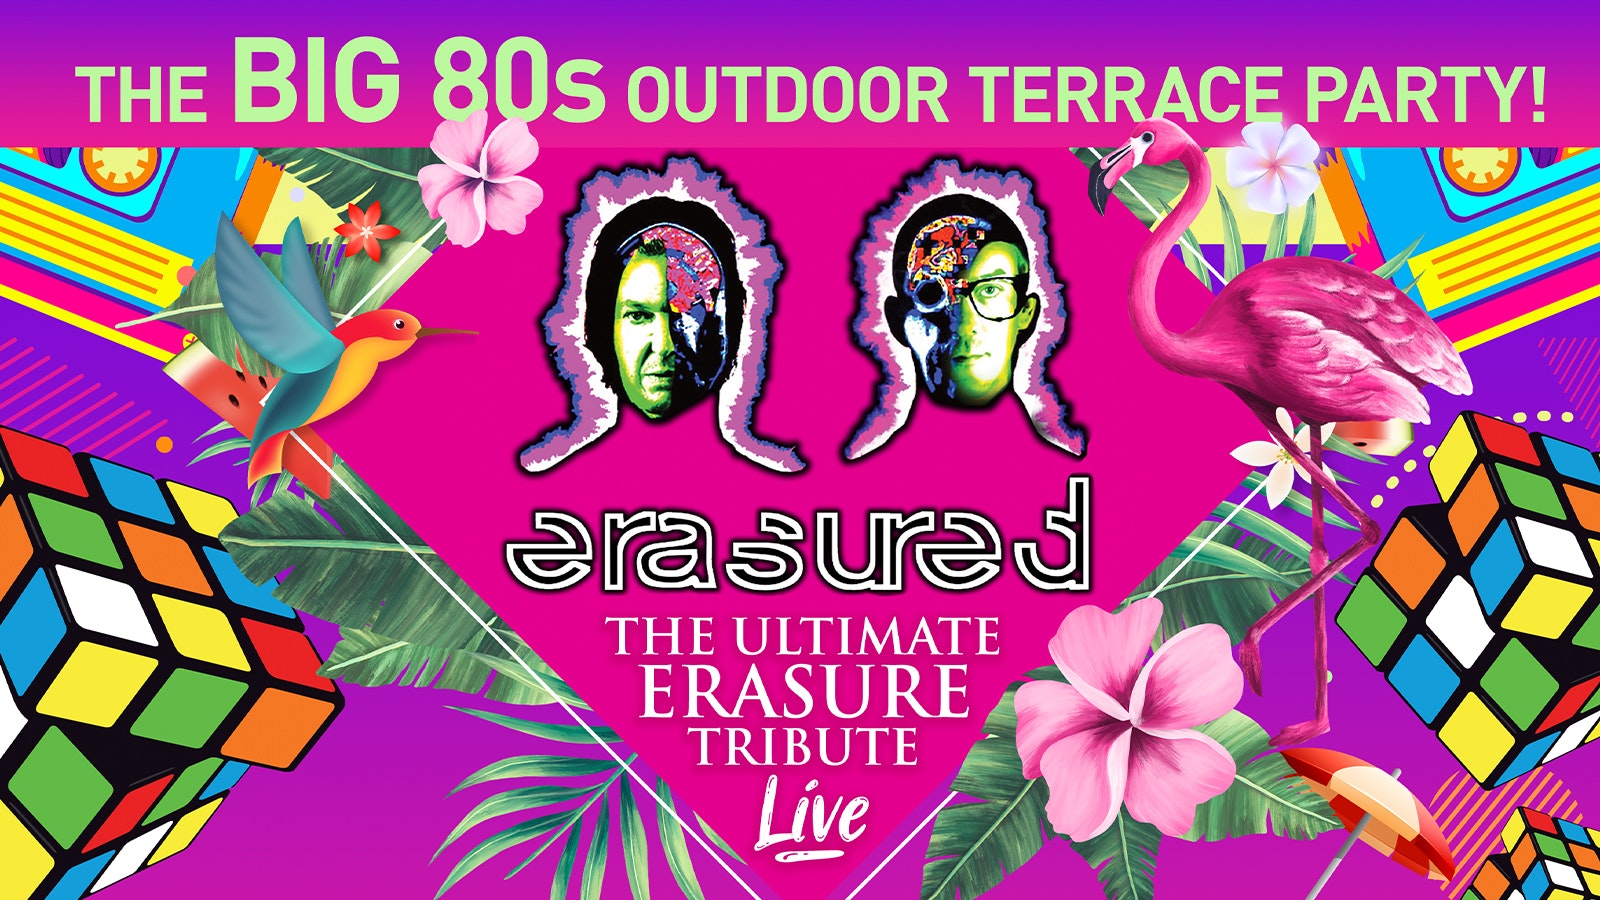 🚨 LAST FEW TICKETS! BIG 80s OUTDOOR TERRACE PARTY LIVE ft ERASURE’S Greatest Hits & 80s Party